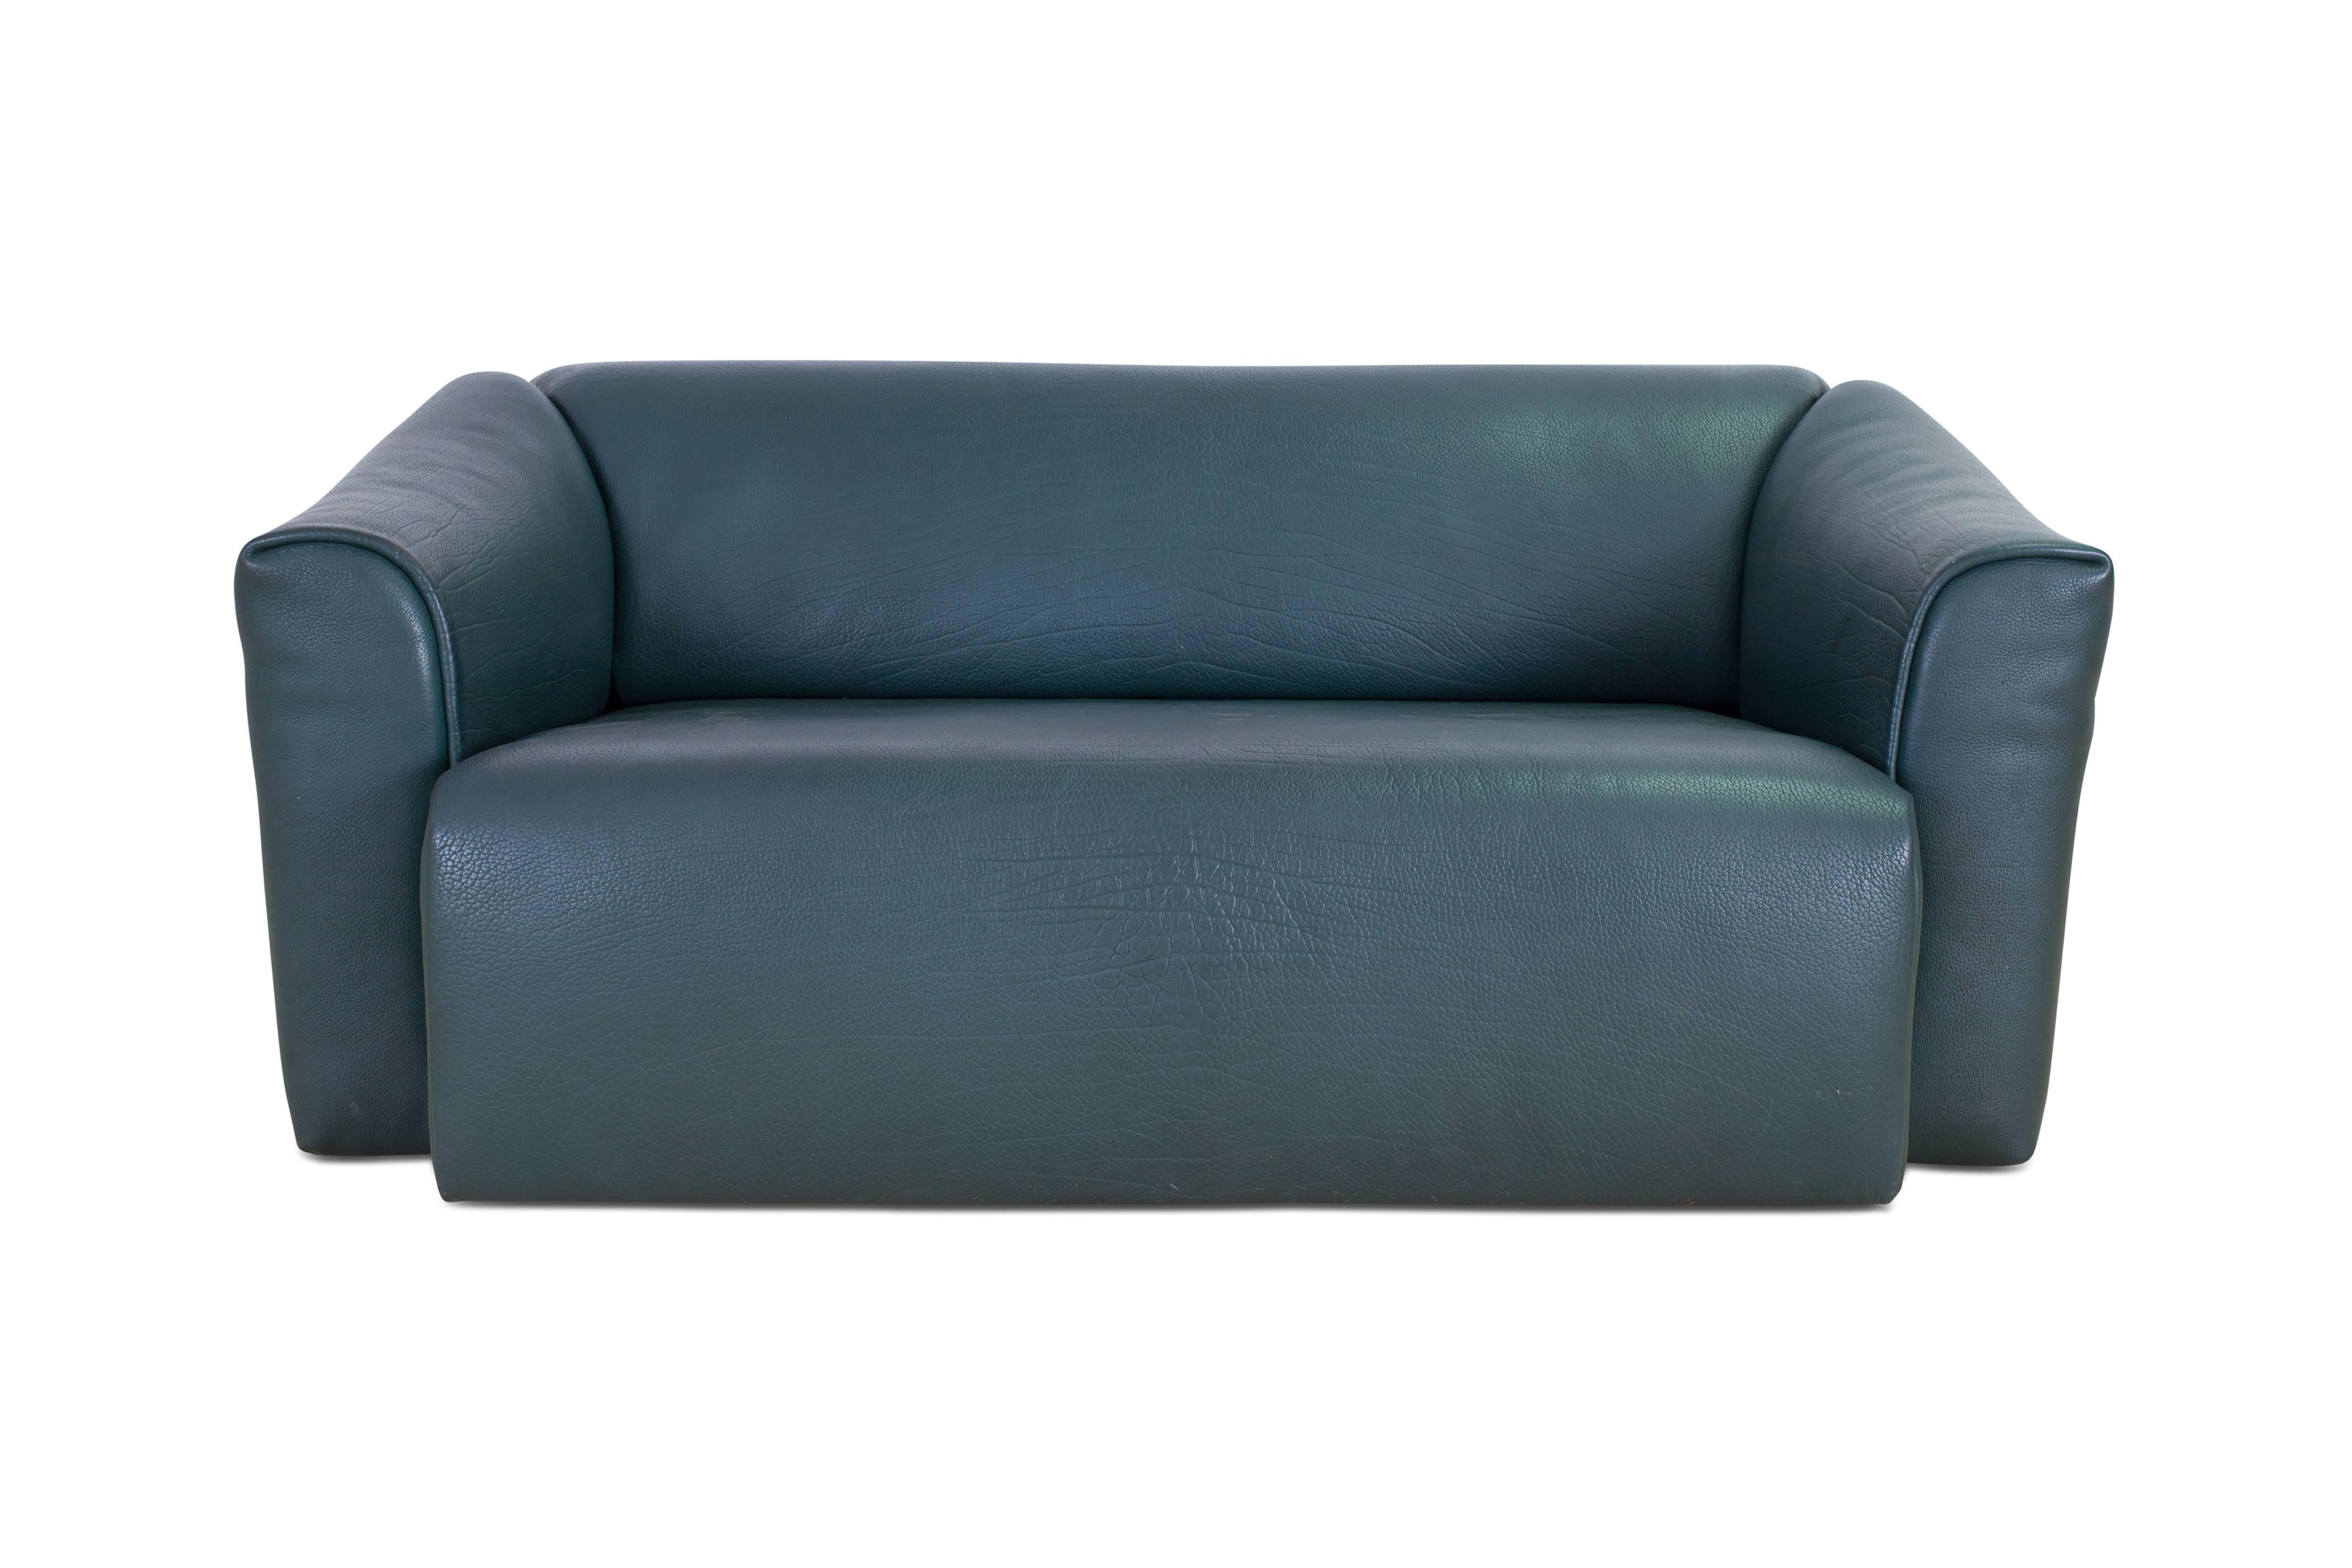 Petrol blue green bull neck-leather sofa with retractable seating part by Swiss manufacturer De Sede.

A true design Classic and the largest DS 47 model in mint condition.

we have a pair available

Measures: D 89 - 106 cm x H 72 cm x W 181 cm.